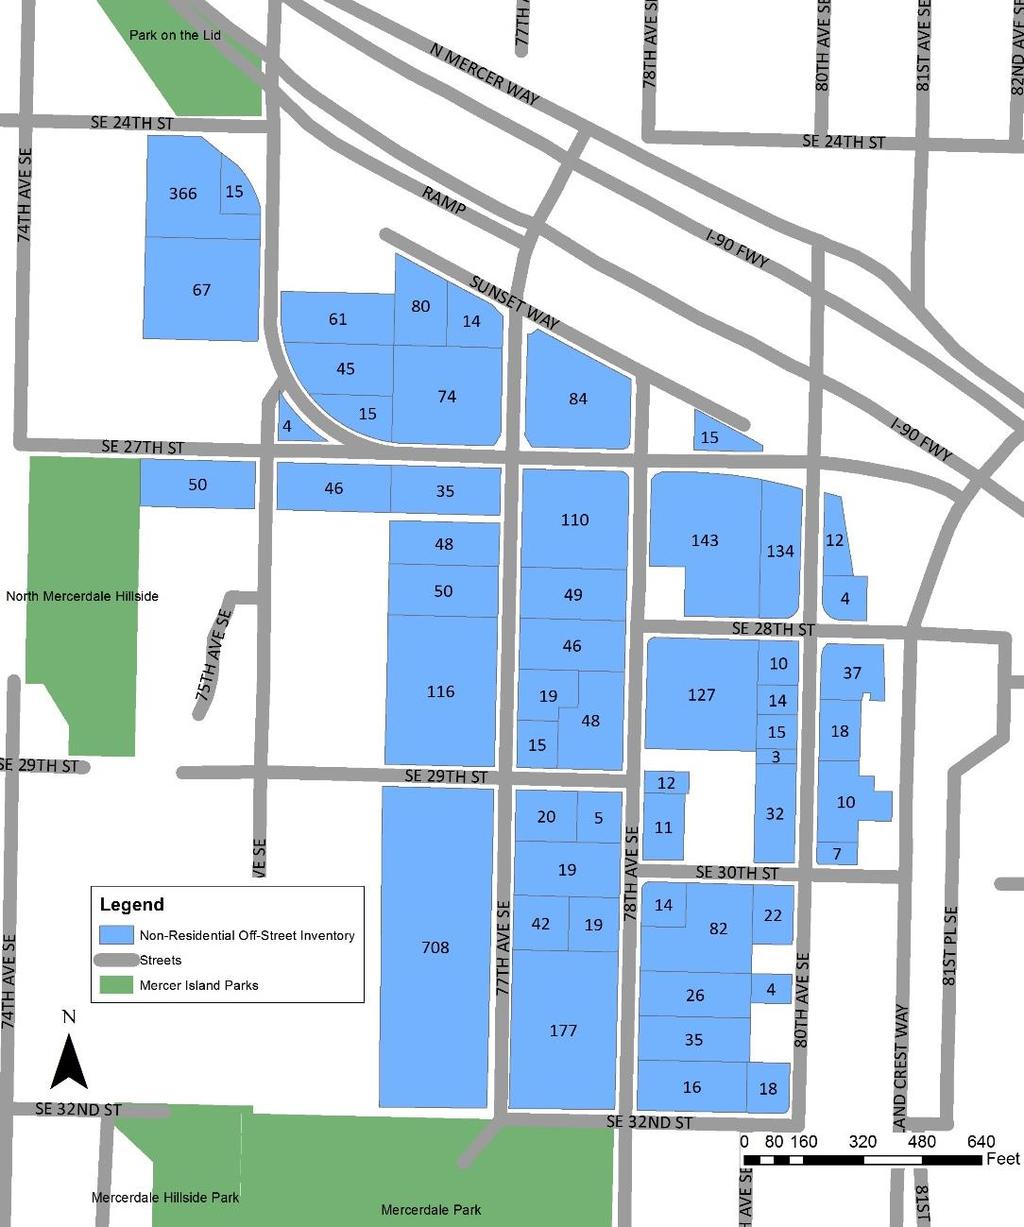 Inventory of (Non-Residential) Off-Street Parking in Town Center Off-Street Supply